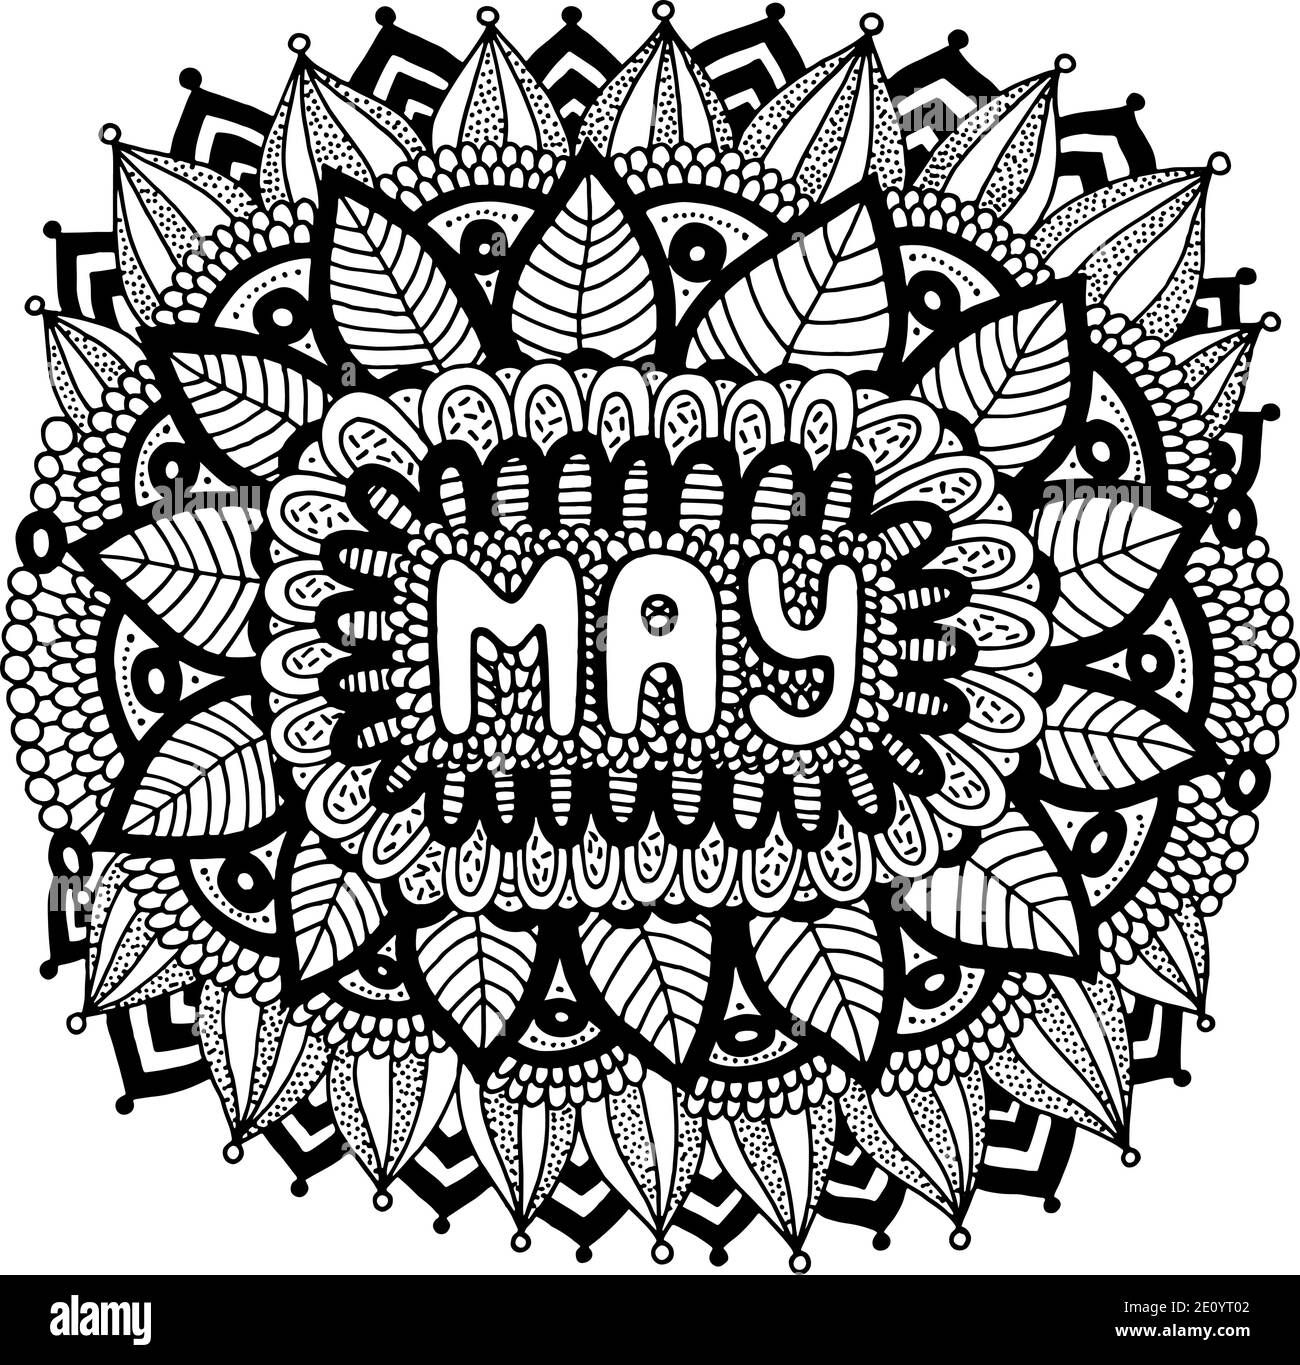 Adult coloring sheet stock vector images